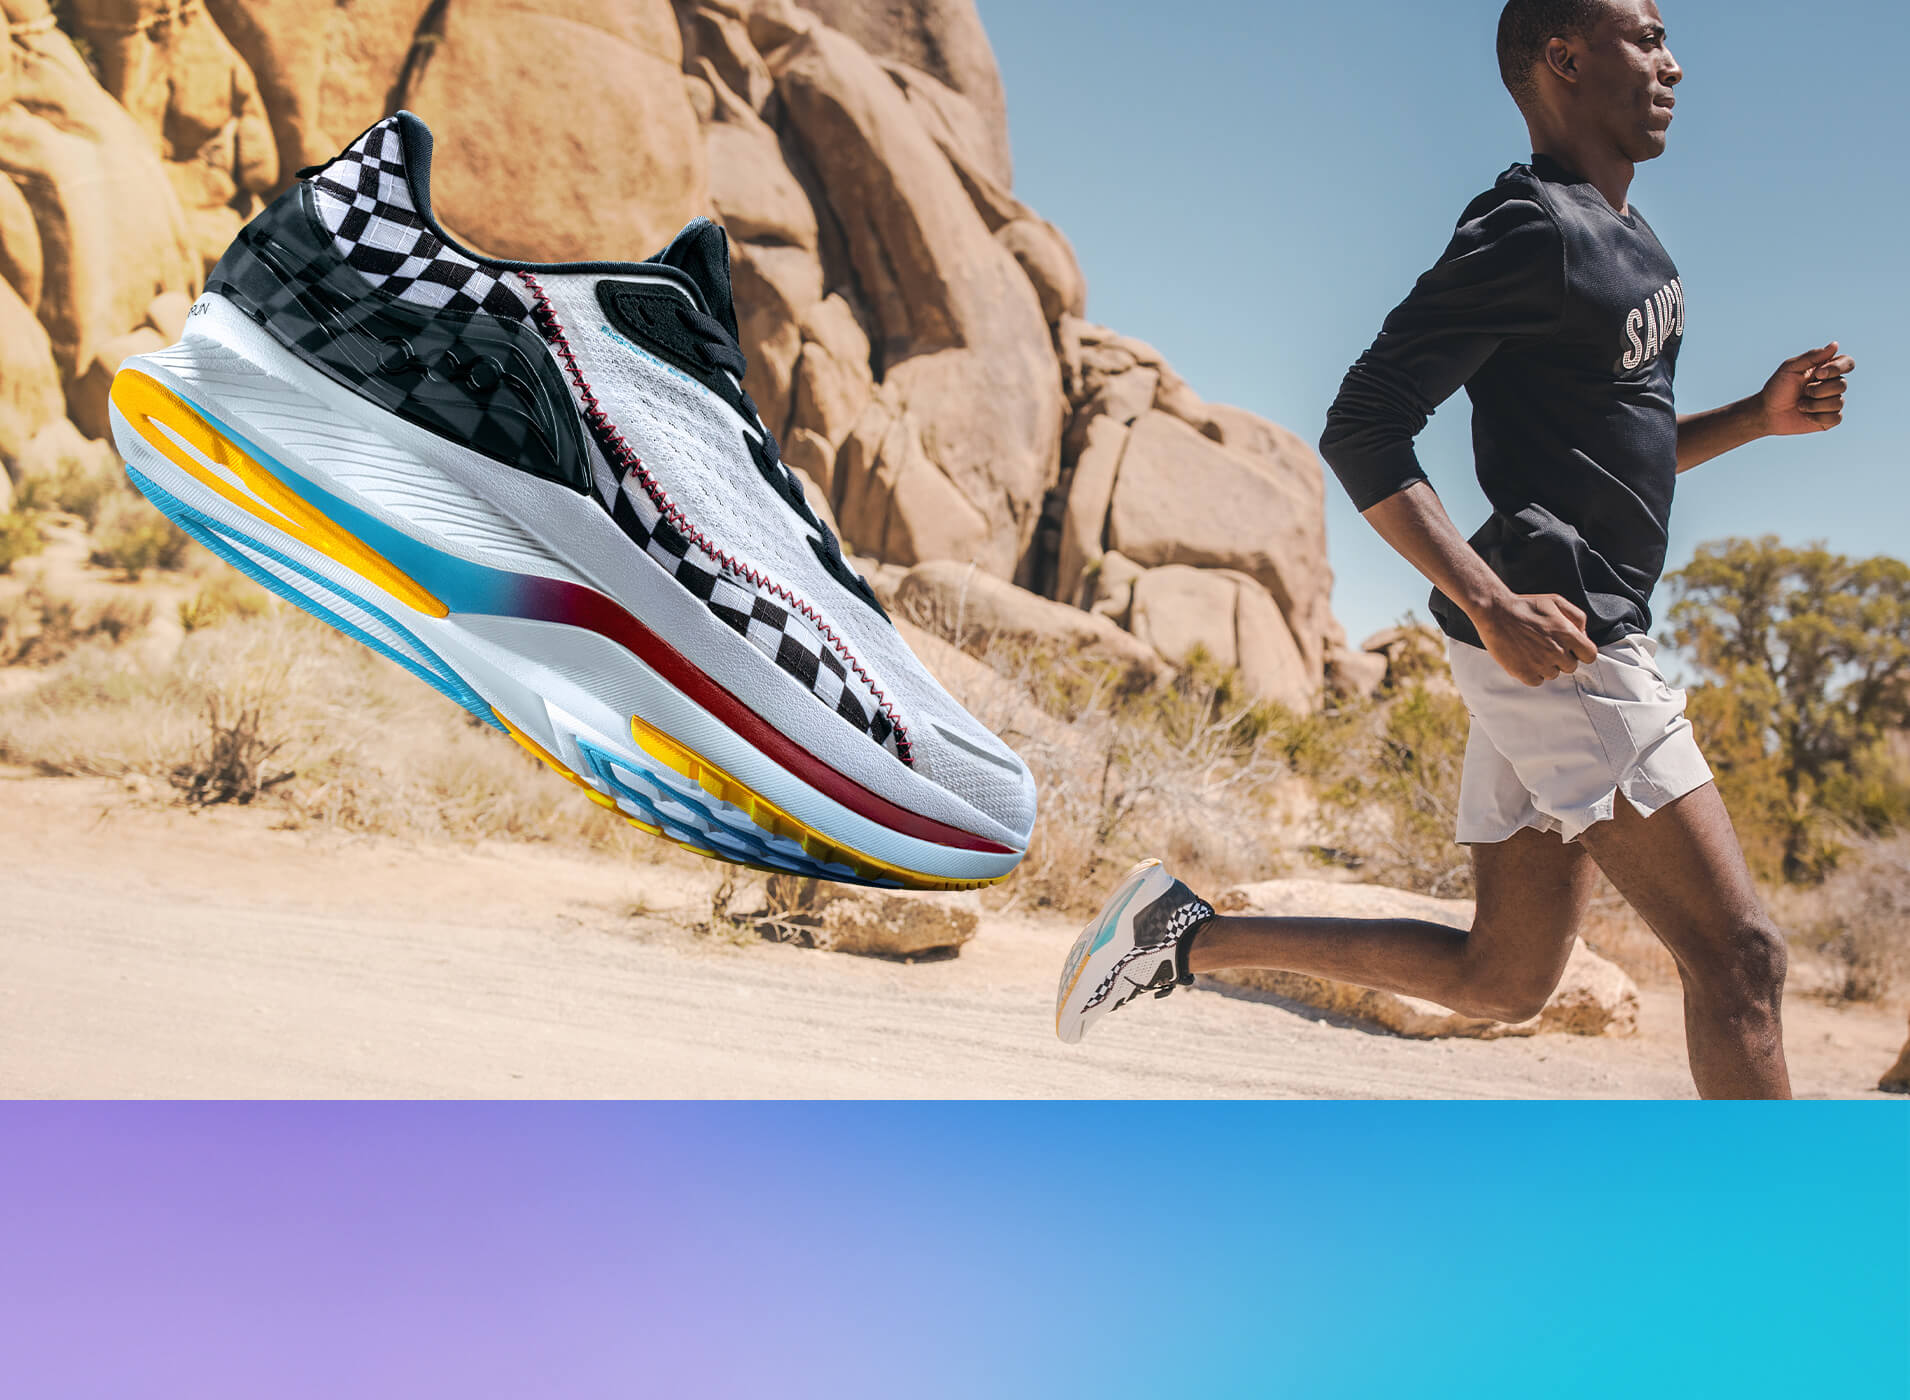 Running Shoes, Clothing, & Accessories | Saucony